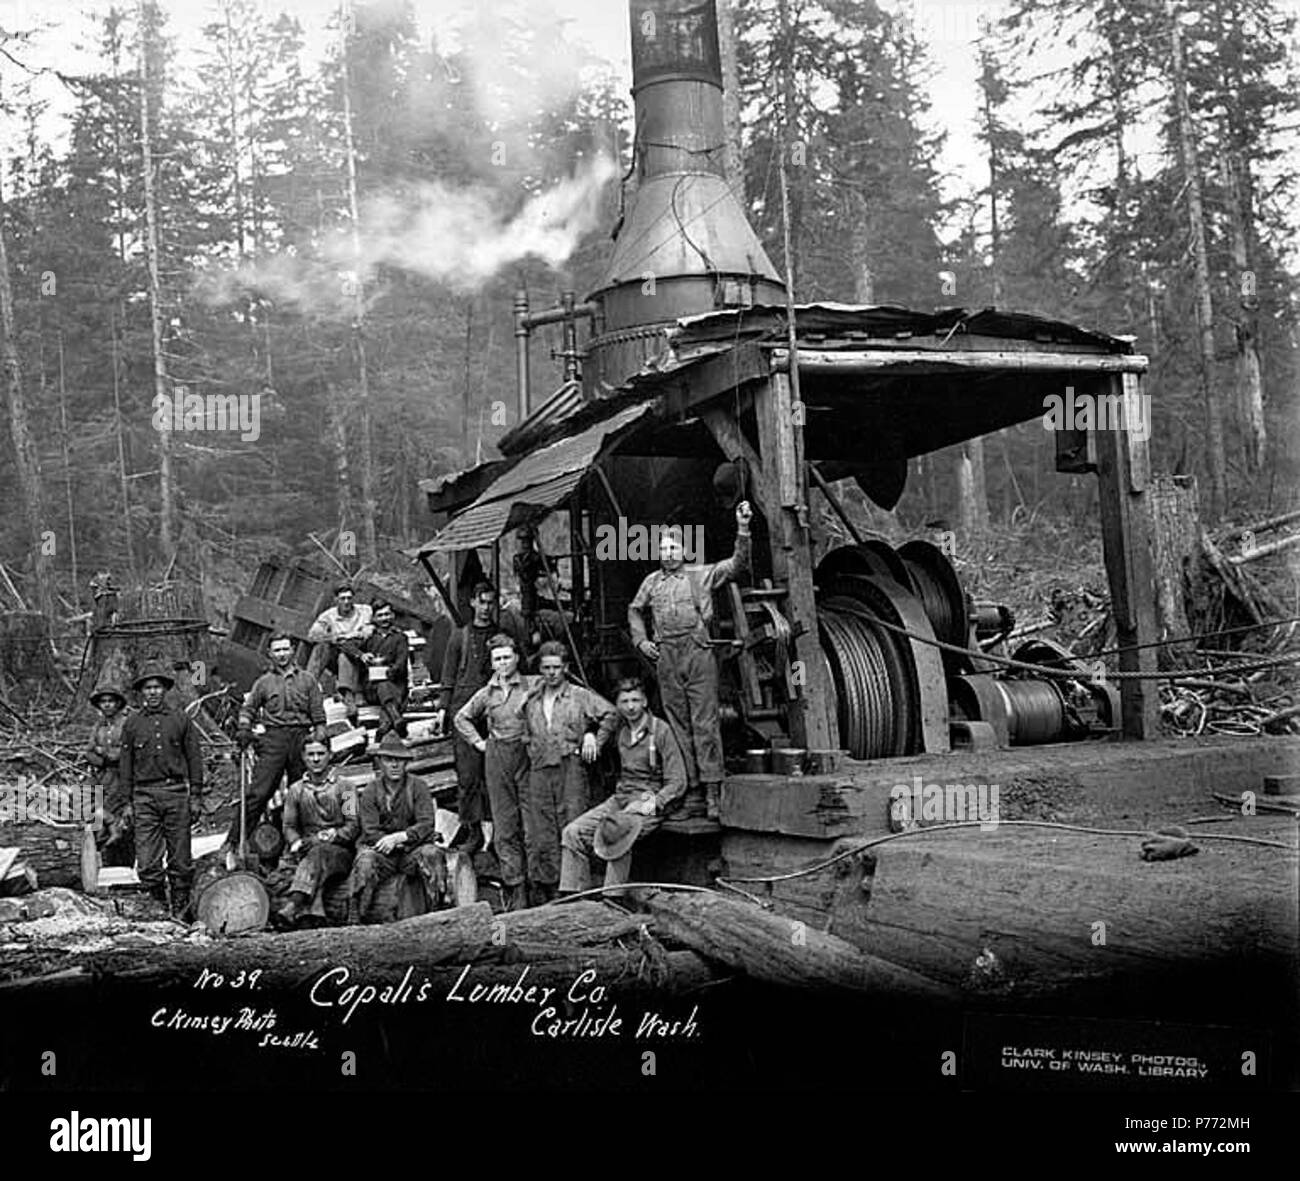 . English: Crew with donkey engine, Copalis Lumber Company, near Carlisle, ca. 1917 . English: Caption on image: Copalis Lumber Co., Carlisle, Wash. C. Kinsey Photo, Seattle. No. 39 PH Coll 516.813 The Copalis Lumber Company was in business in Carlisle from 1914 to 1920. It's logging railroad was absorbed into the Carlisle Lumber Company. Carlisle is a small settlement on the Copalis River four miles east of the Pacific Ocean in southwest Grays Harbor County. When established in 1912 by the Carlisle Lumber Company, it was a busy logging and sawmill center. It continued to be active until the c Stock Photo